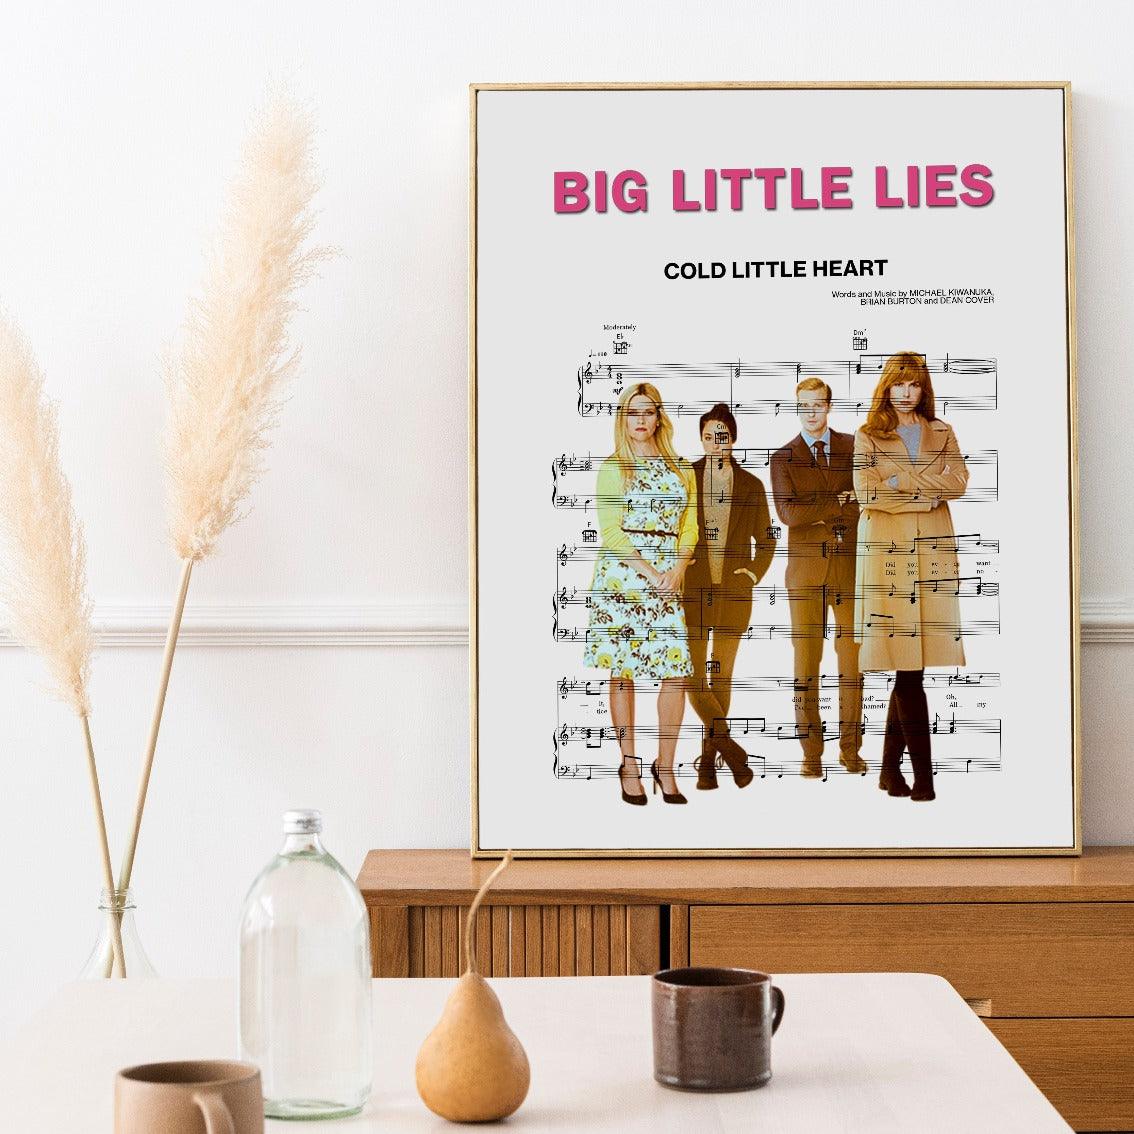 Give your walls some love with this beautiful Big Little Lies Main Theme Poster. Who doesn't love a bit of art with their music? This print combines the lyrics of the beautiful main theme song from the hit TV series Big Little Lies, handwritten by the show's composer and musician David Arnold. This print is the perfect addition to any fan's home and makes for a perfect gift for any music lover.